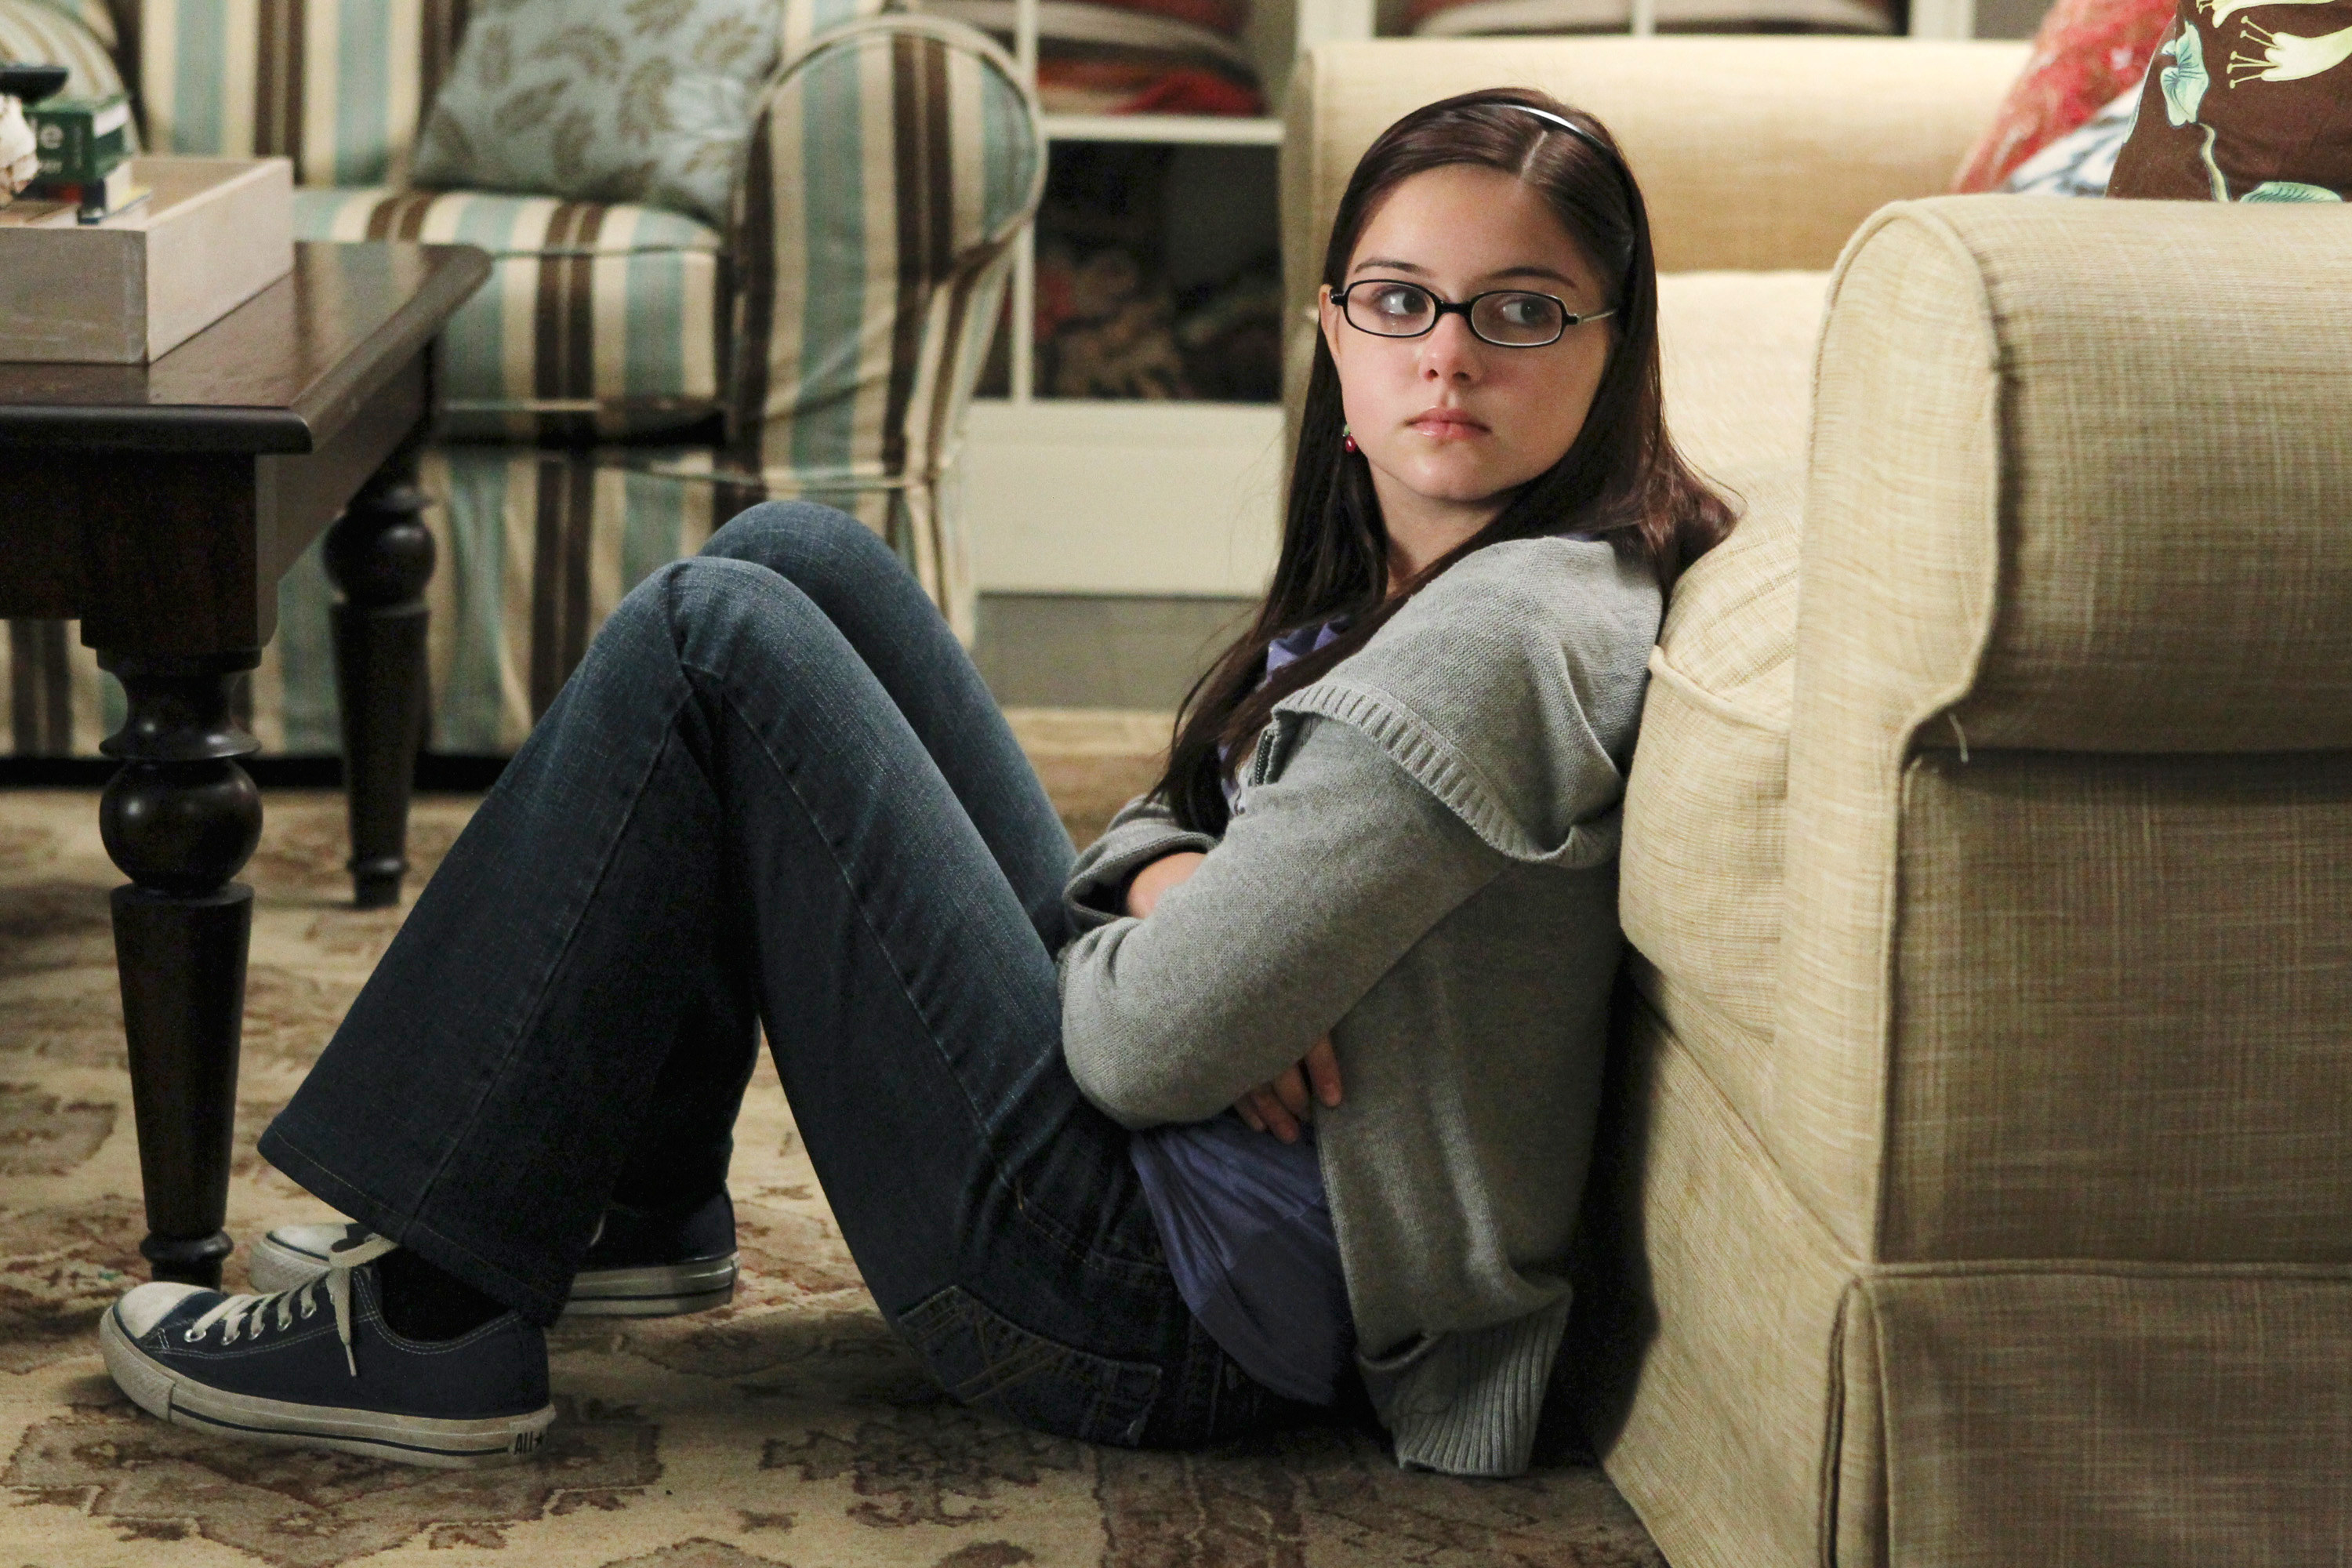 Ariel sitting on the floor on the show Modern Family